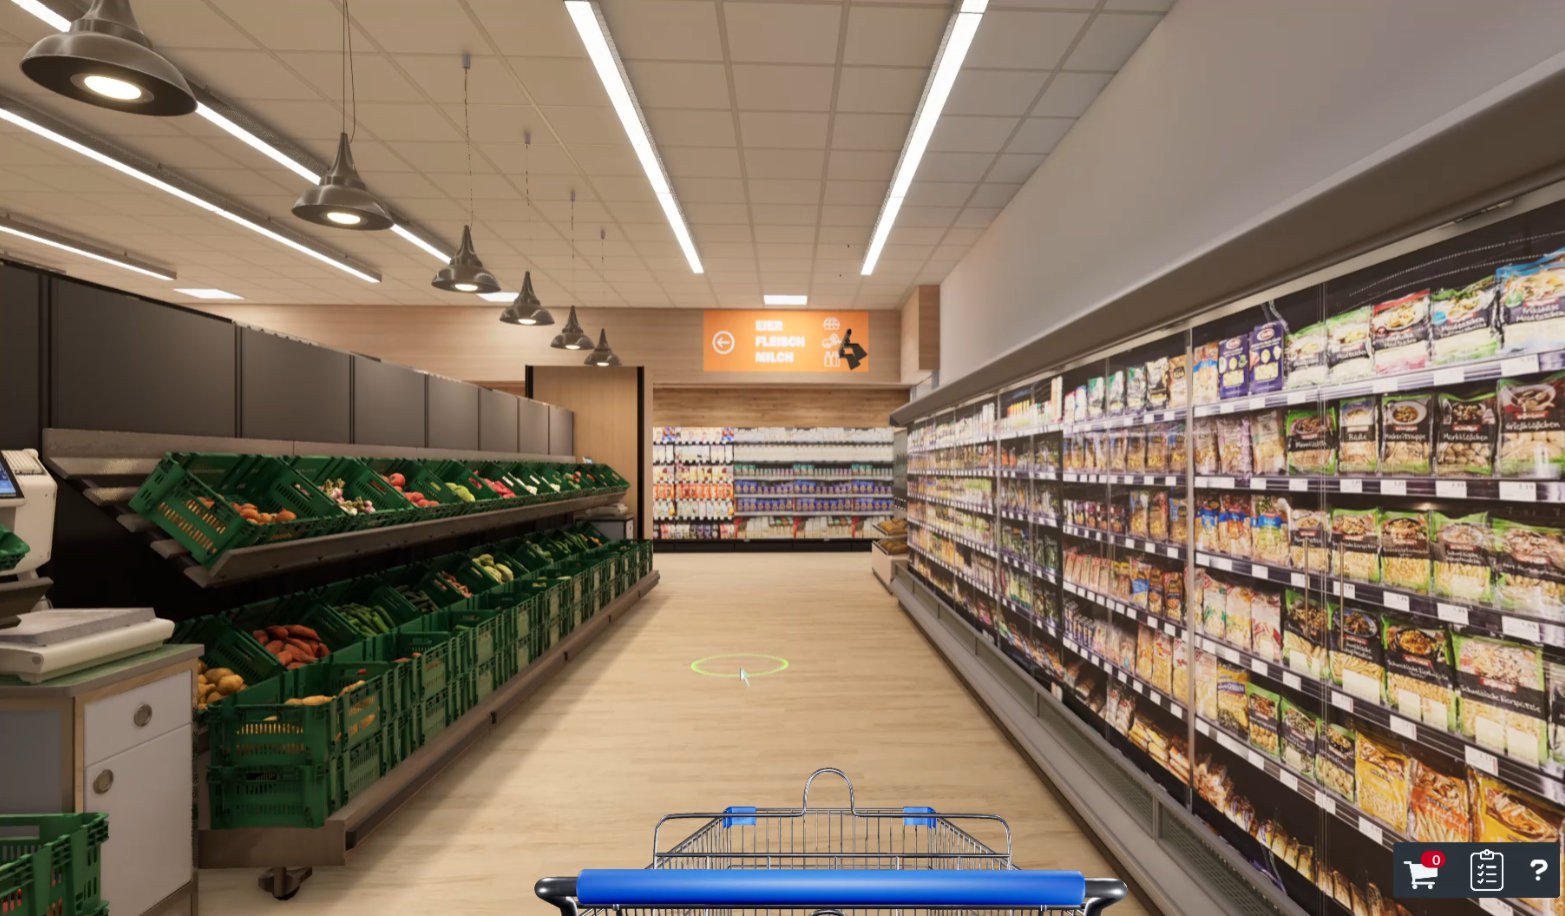 The test subjects push a shopping cart through the supermarket aisles: